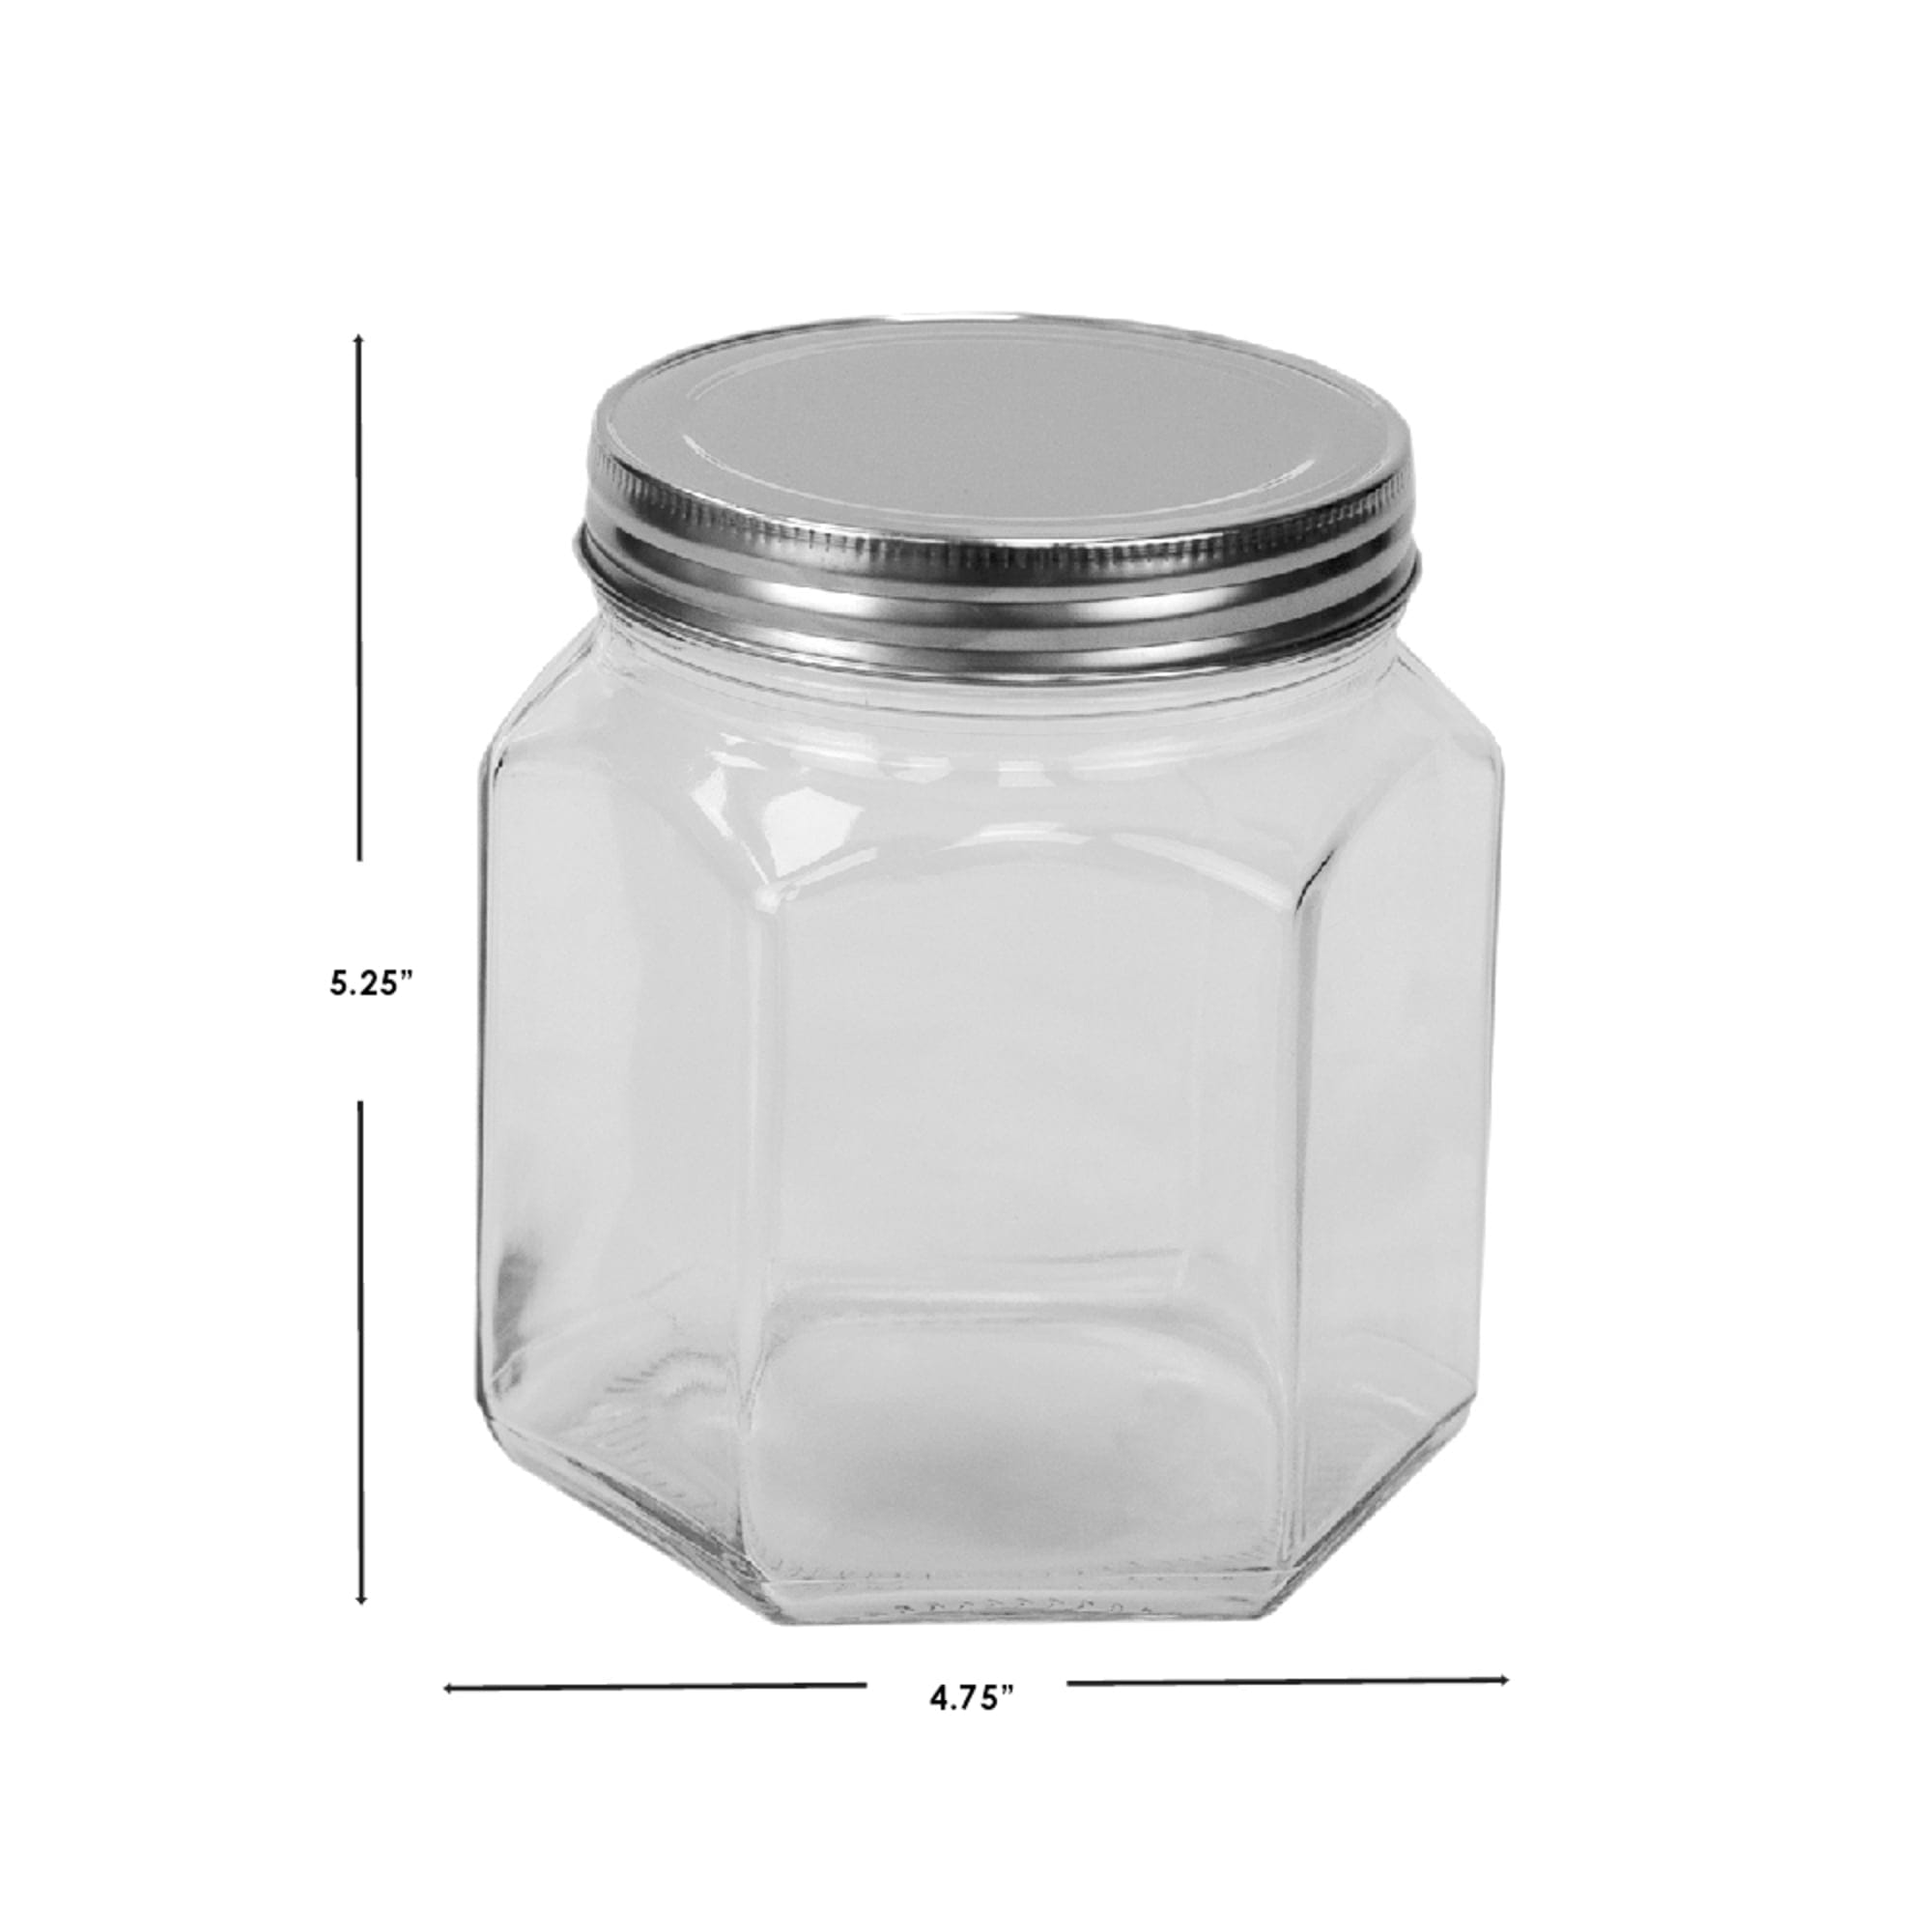 Home Basics  26 oz. Small Hexagon Glass Canister, Clear $2.00 EACH, CASE PACK OF 24